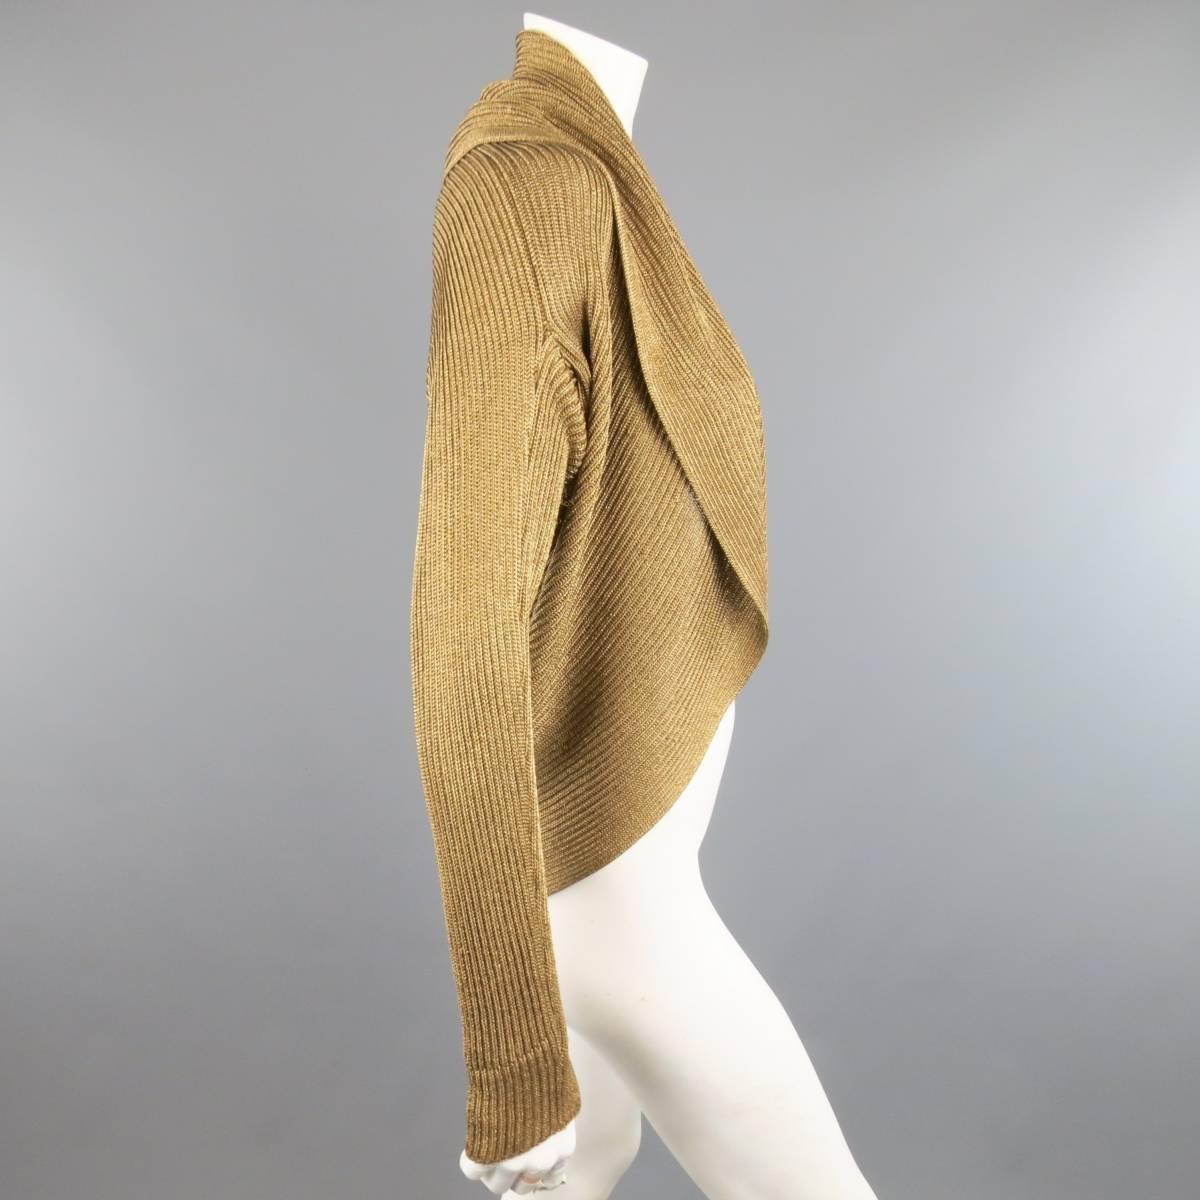 RALPH LAUREN BLACK LABEL cardigan comes in a metallic gold silk blend sparkle knit and features an oversized draped shawl collar and open front. Minor wear throughout.
 
Good Pre-Owned Condition.
Marked: L
 
Measurements:
 
Shoulder: 17 in.
Bust: 42